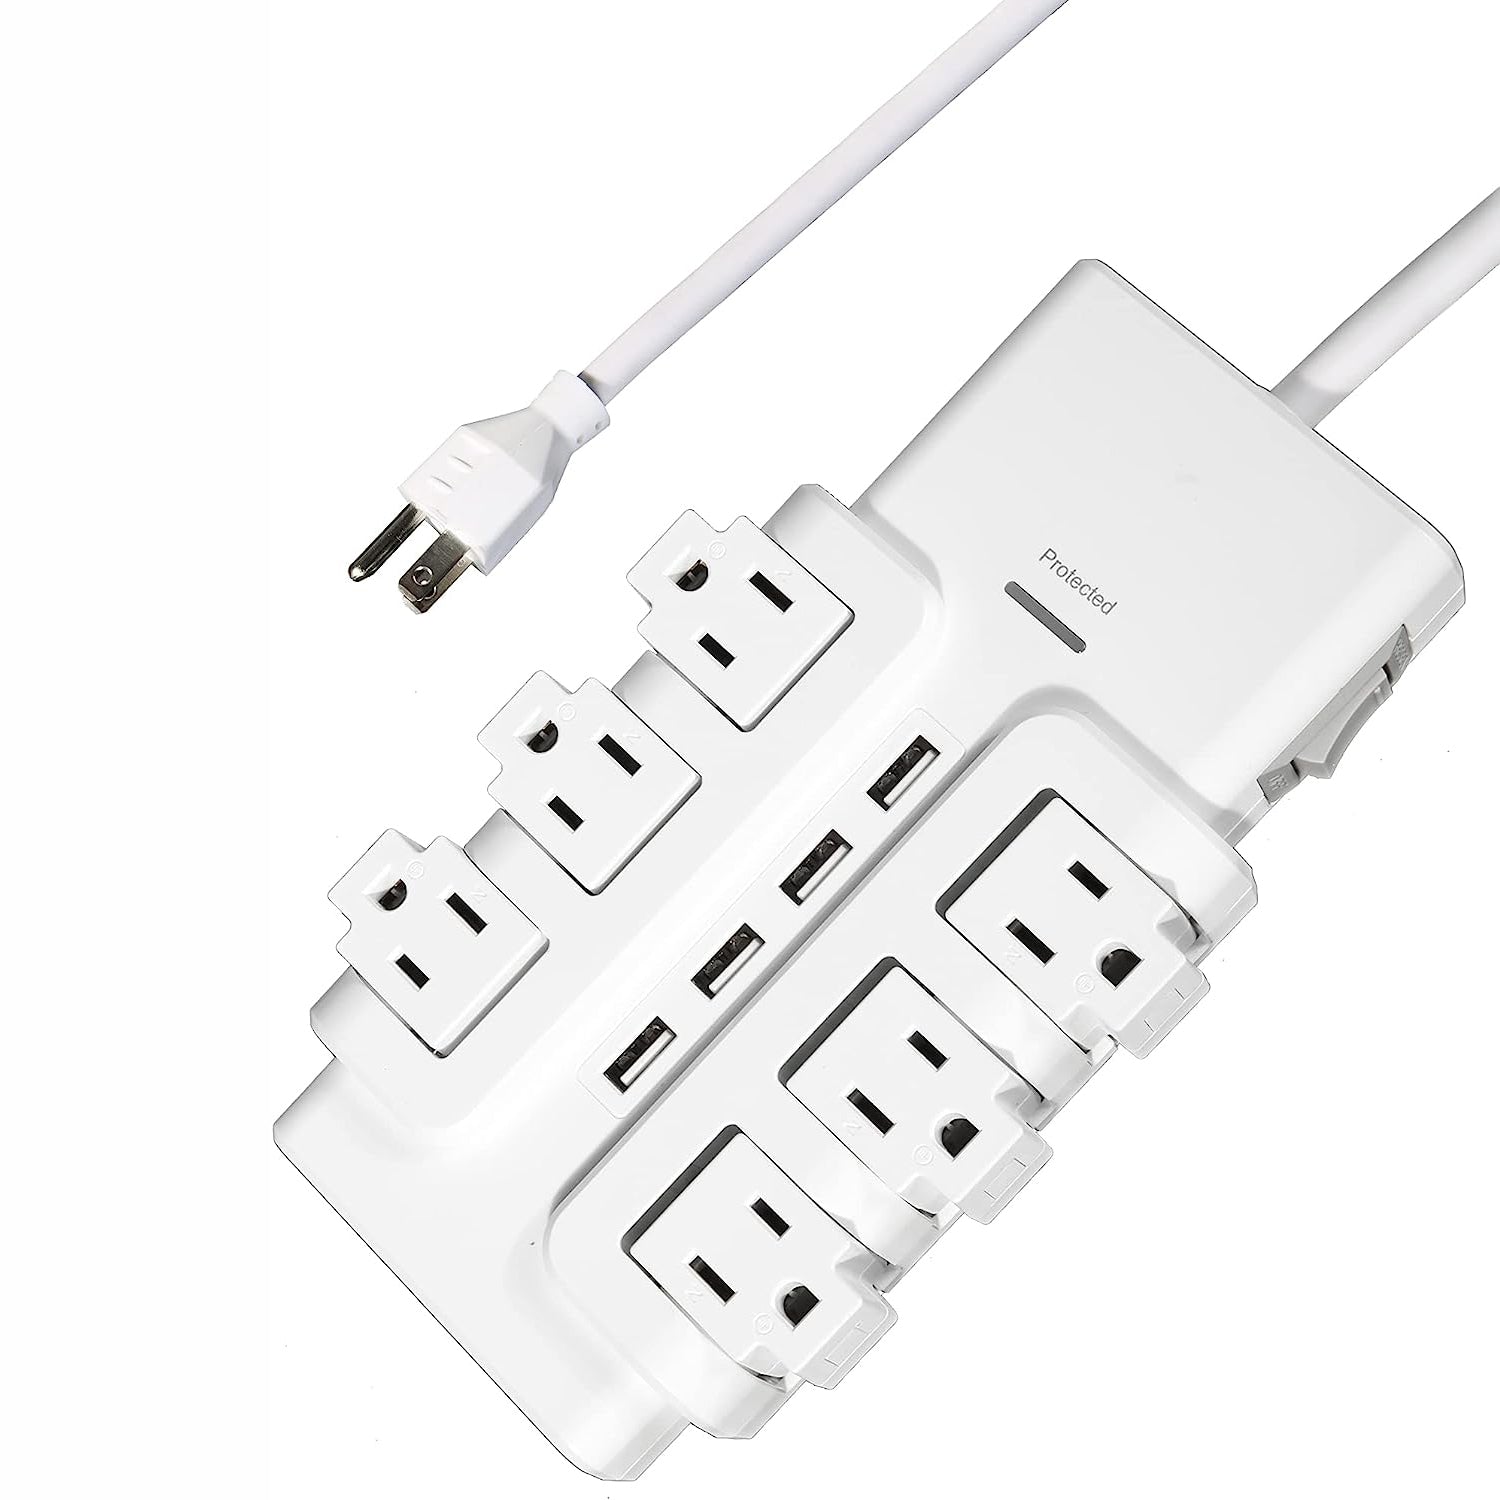 Luckyermore 6 Outlet 4 USB Ports Rotating Power Strip 6ft with Surge Protector Wall Mount for Home Office  